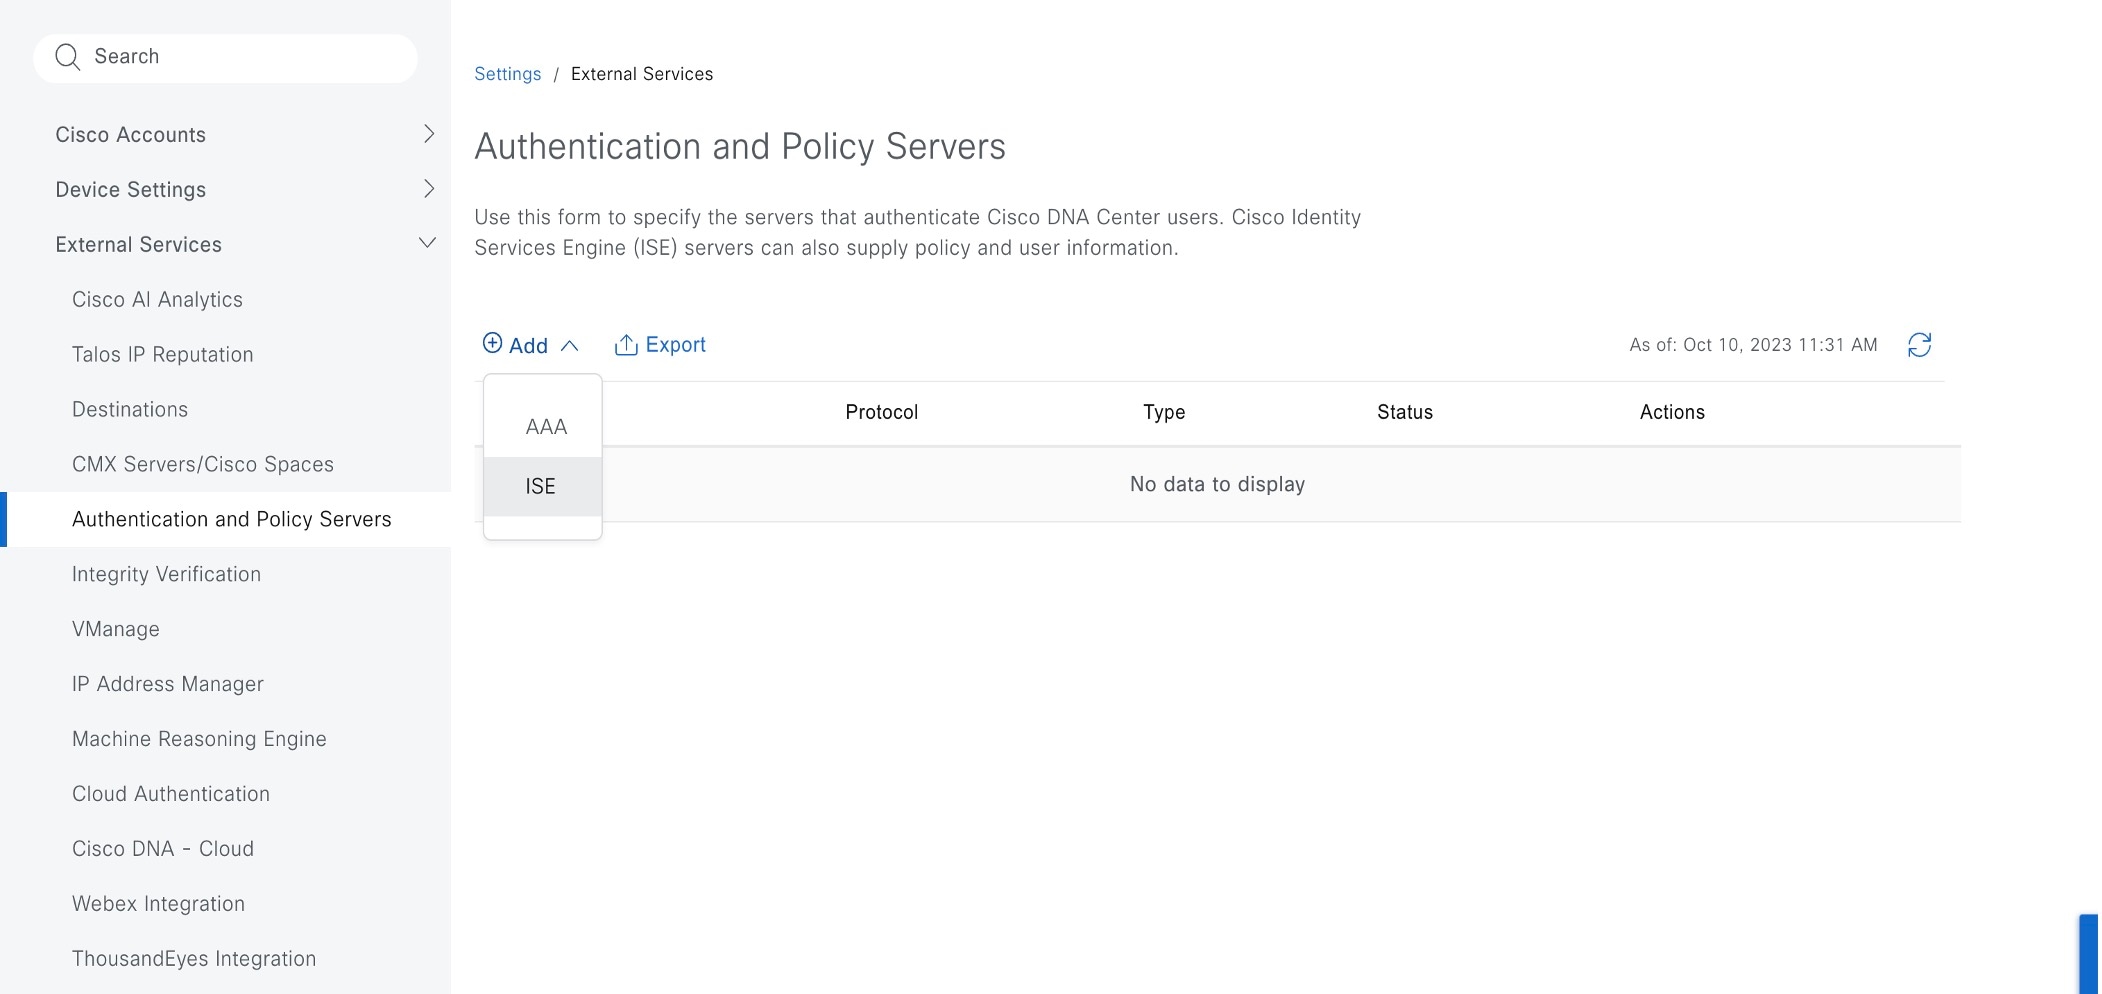 The Authentication and Policy servers page shows the options to add an AAA or ISE server.